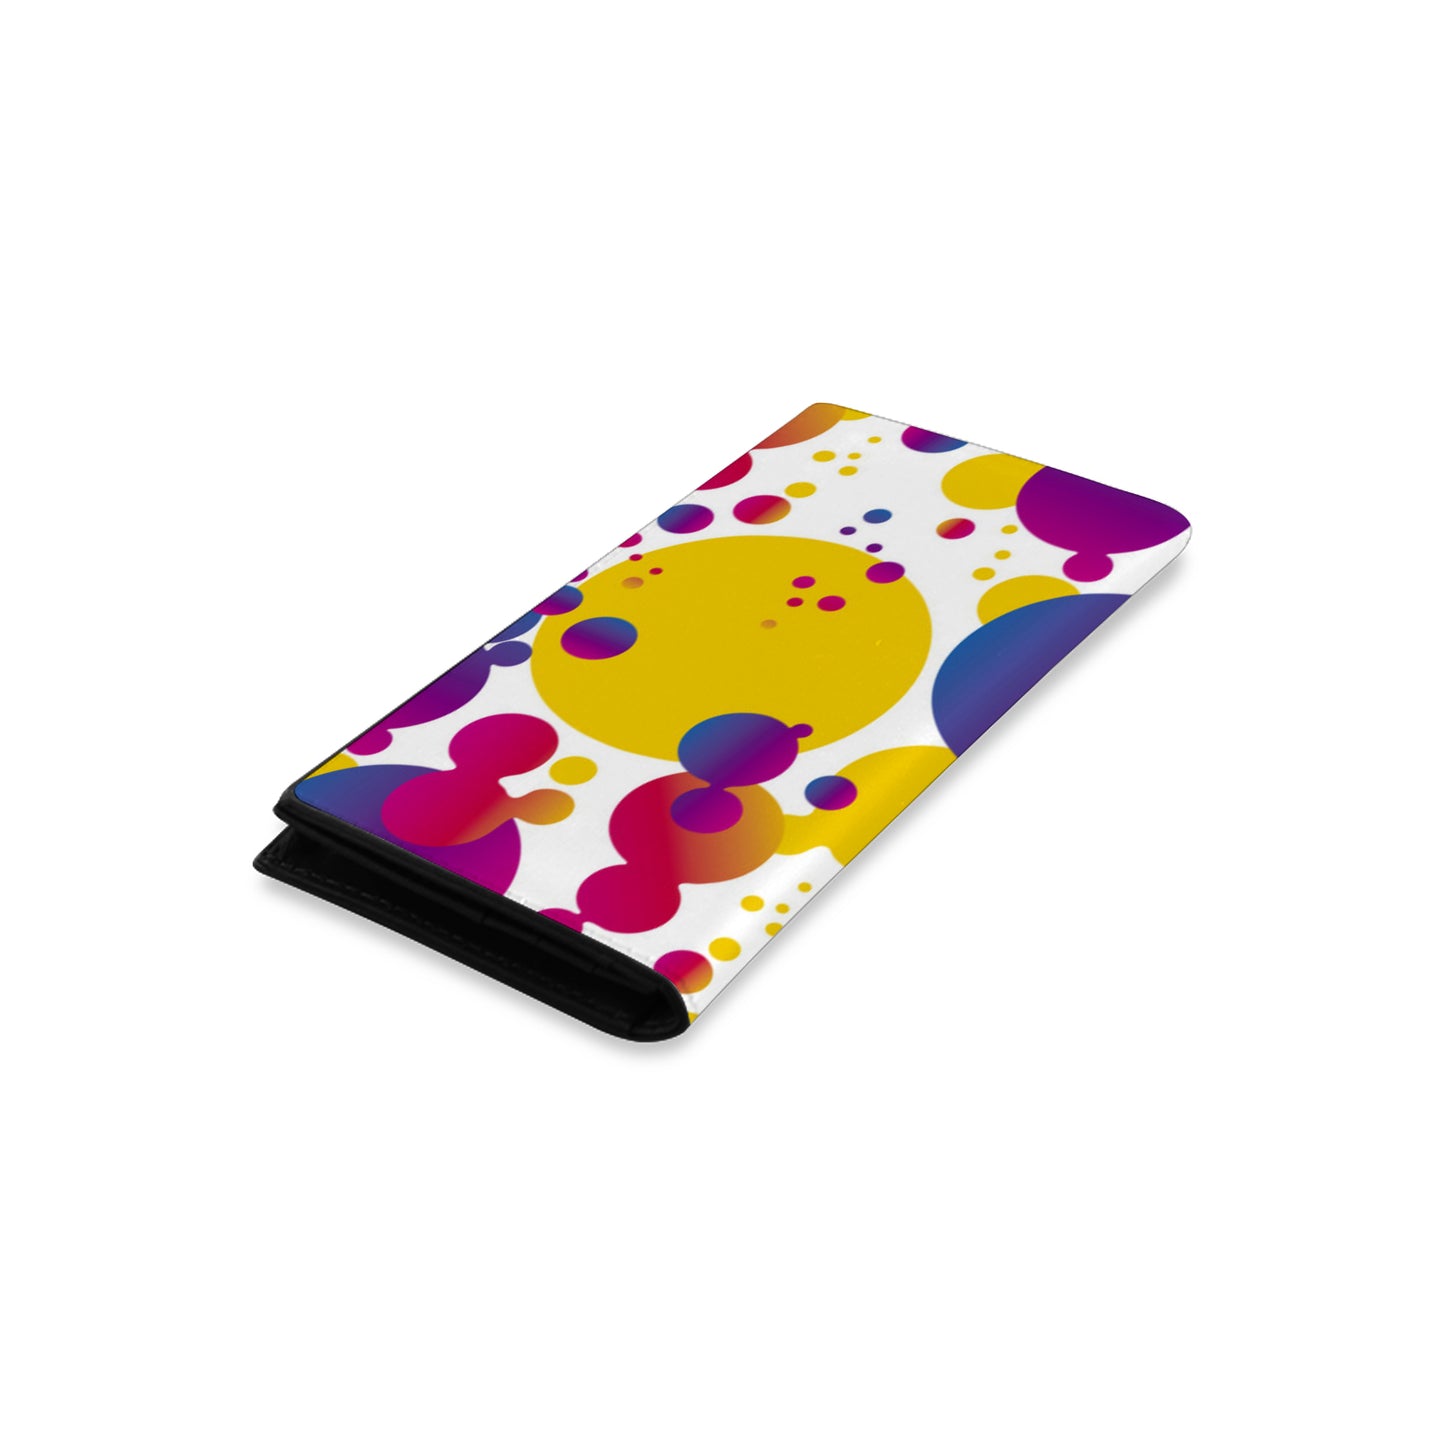 Women's Leather Wallet - Colorful Circles